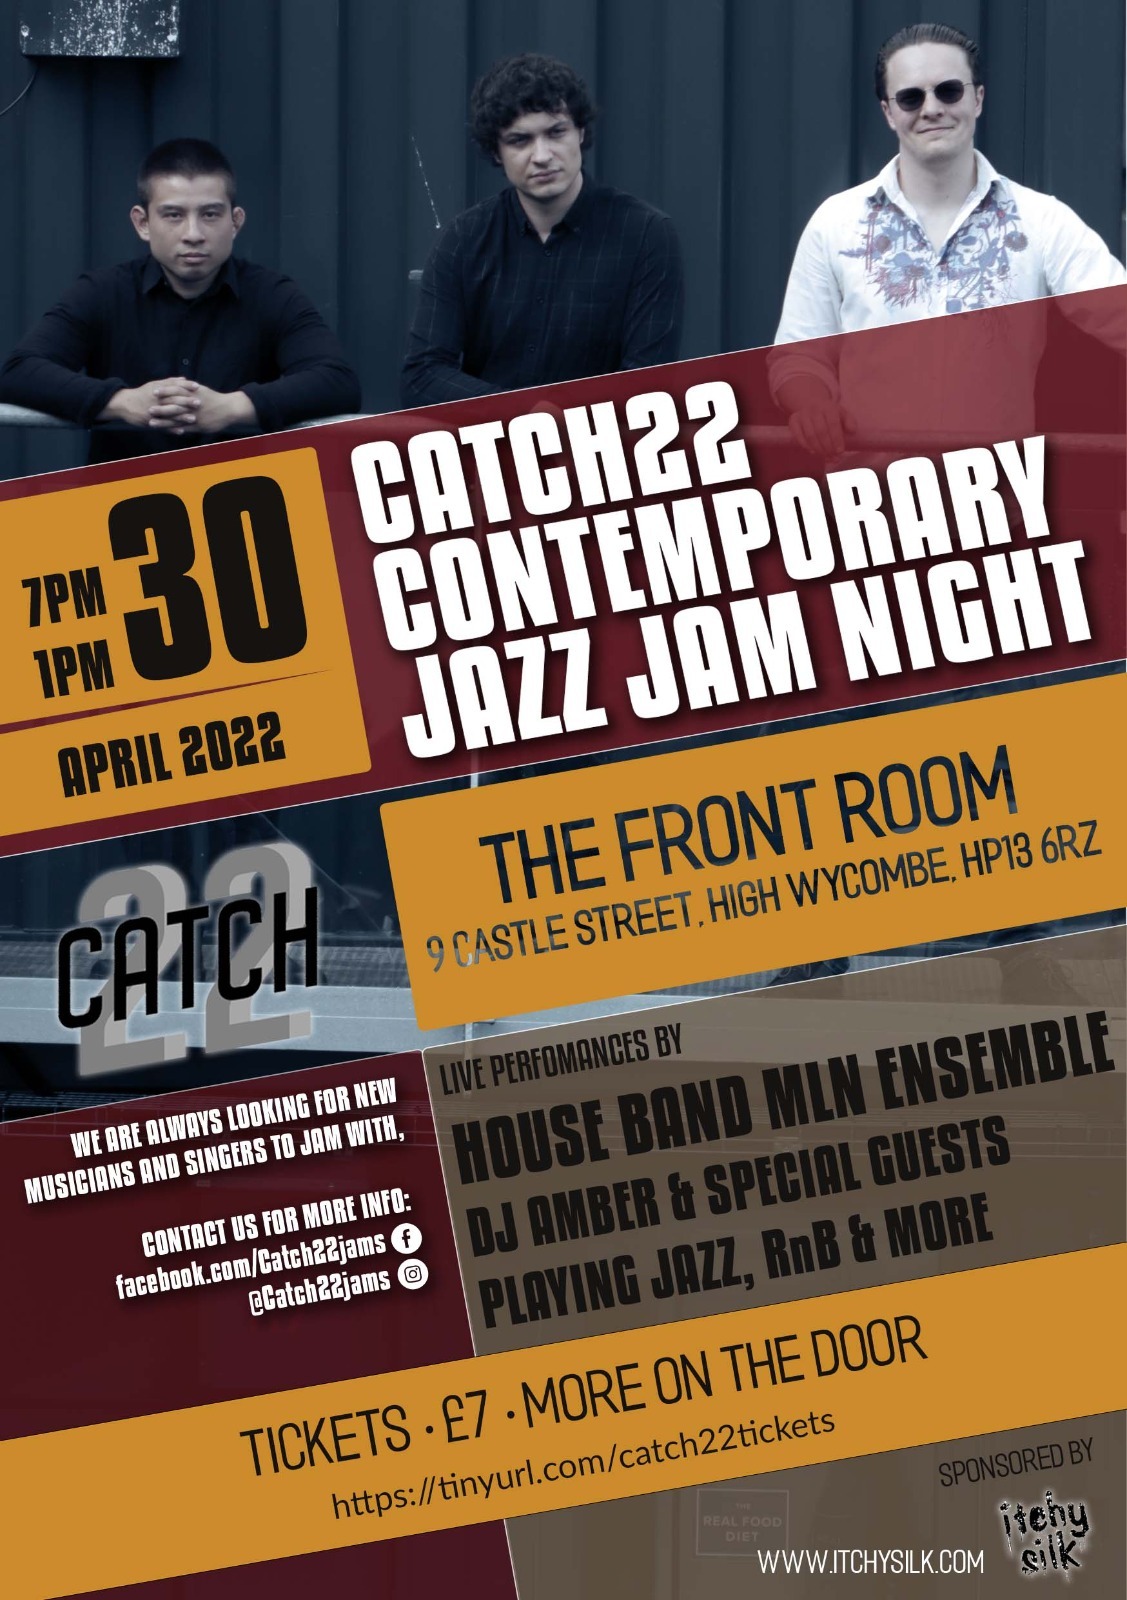 What Catch22 have got on in April